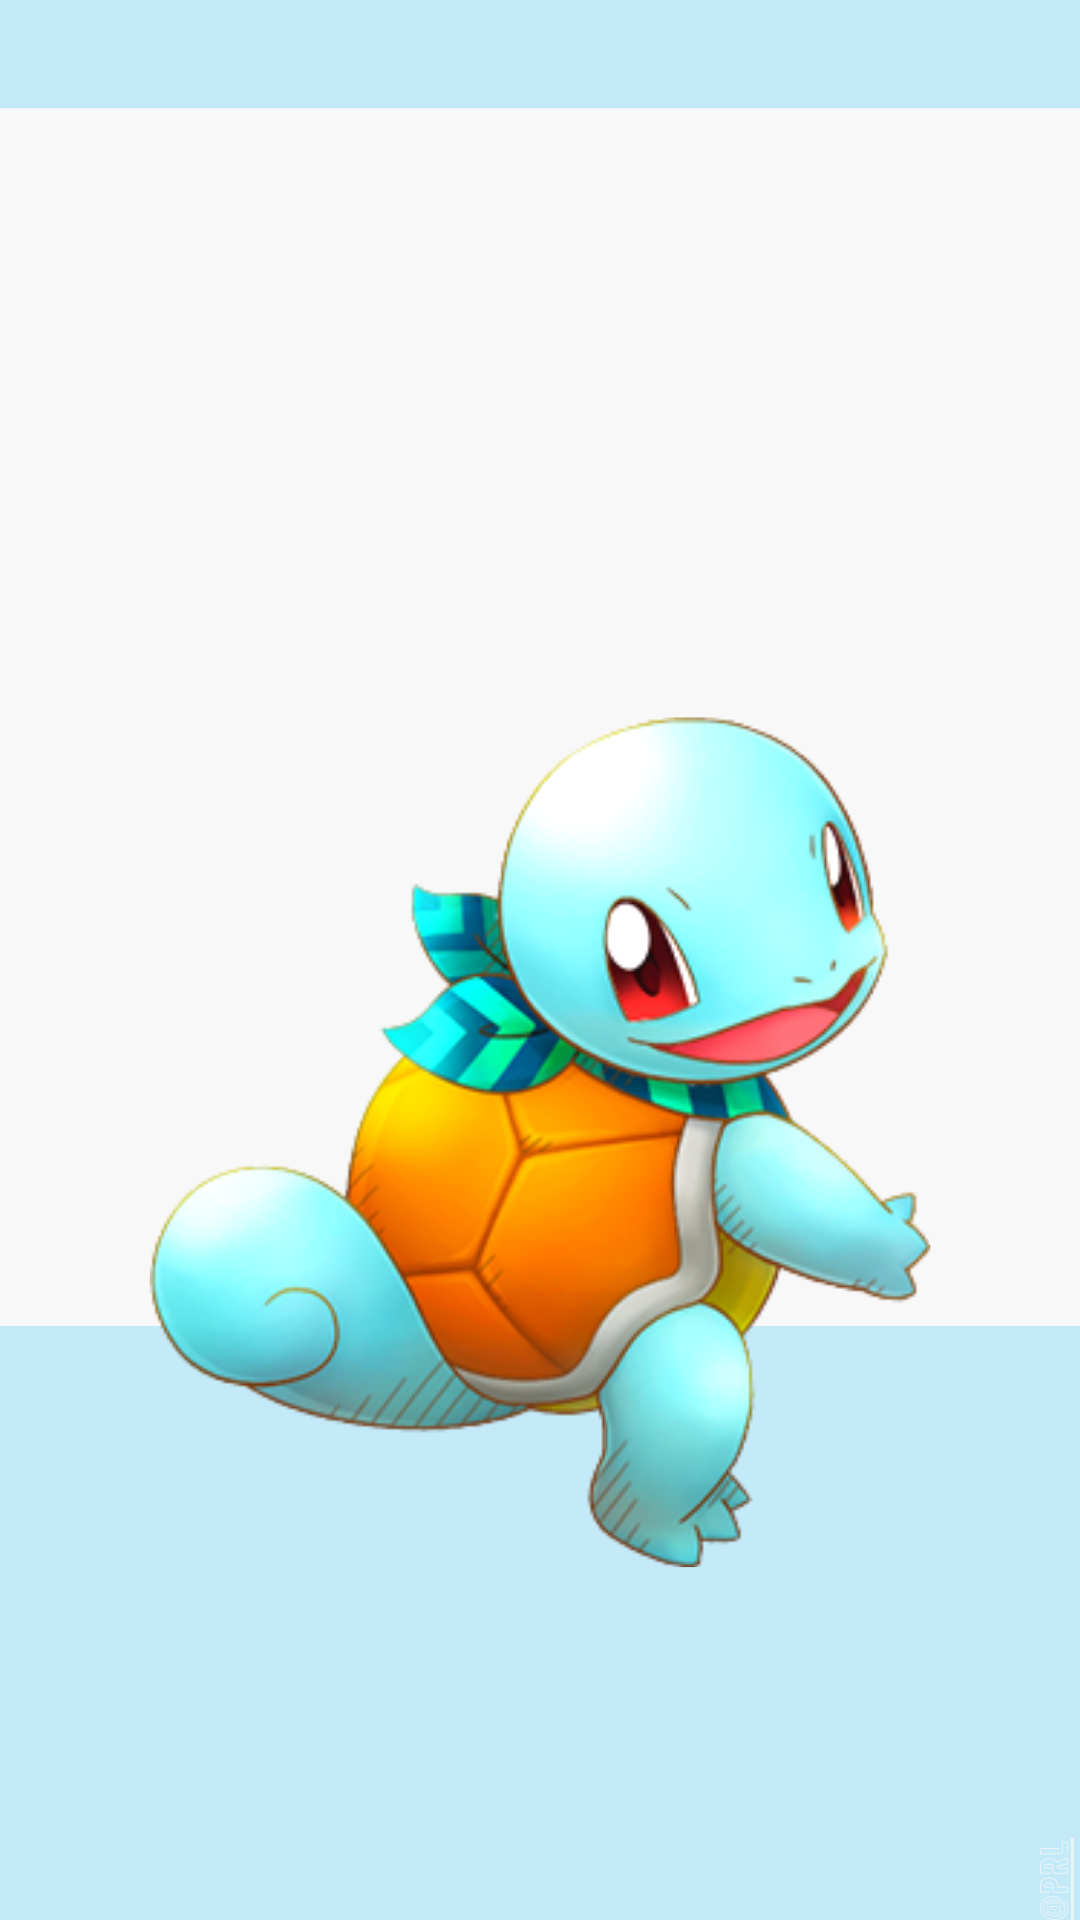 Squirtle Pokemon Face Whatsapp C3971080 Squirtle Adorable